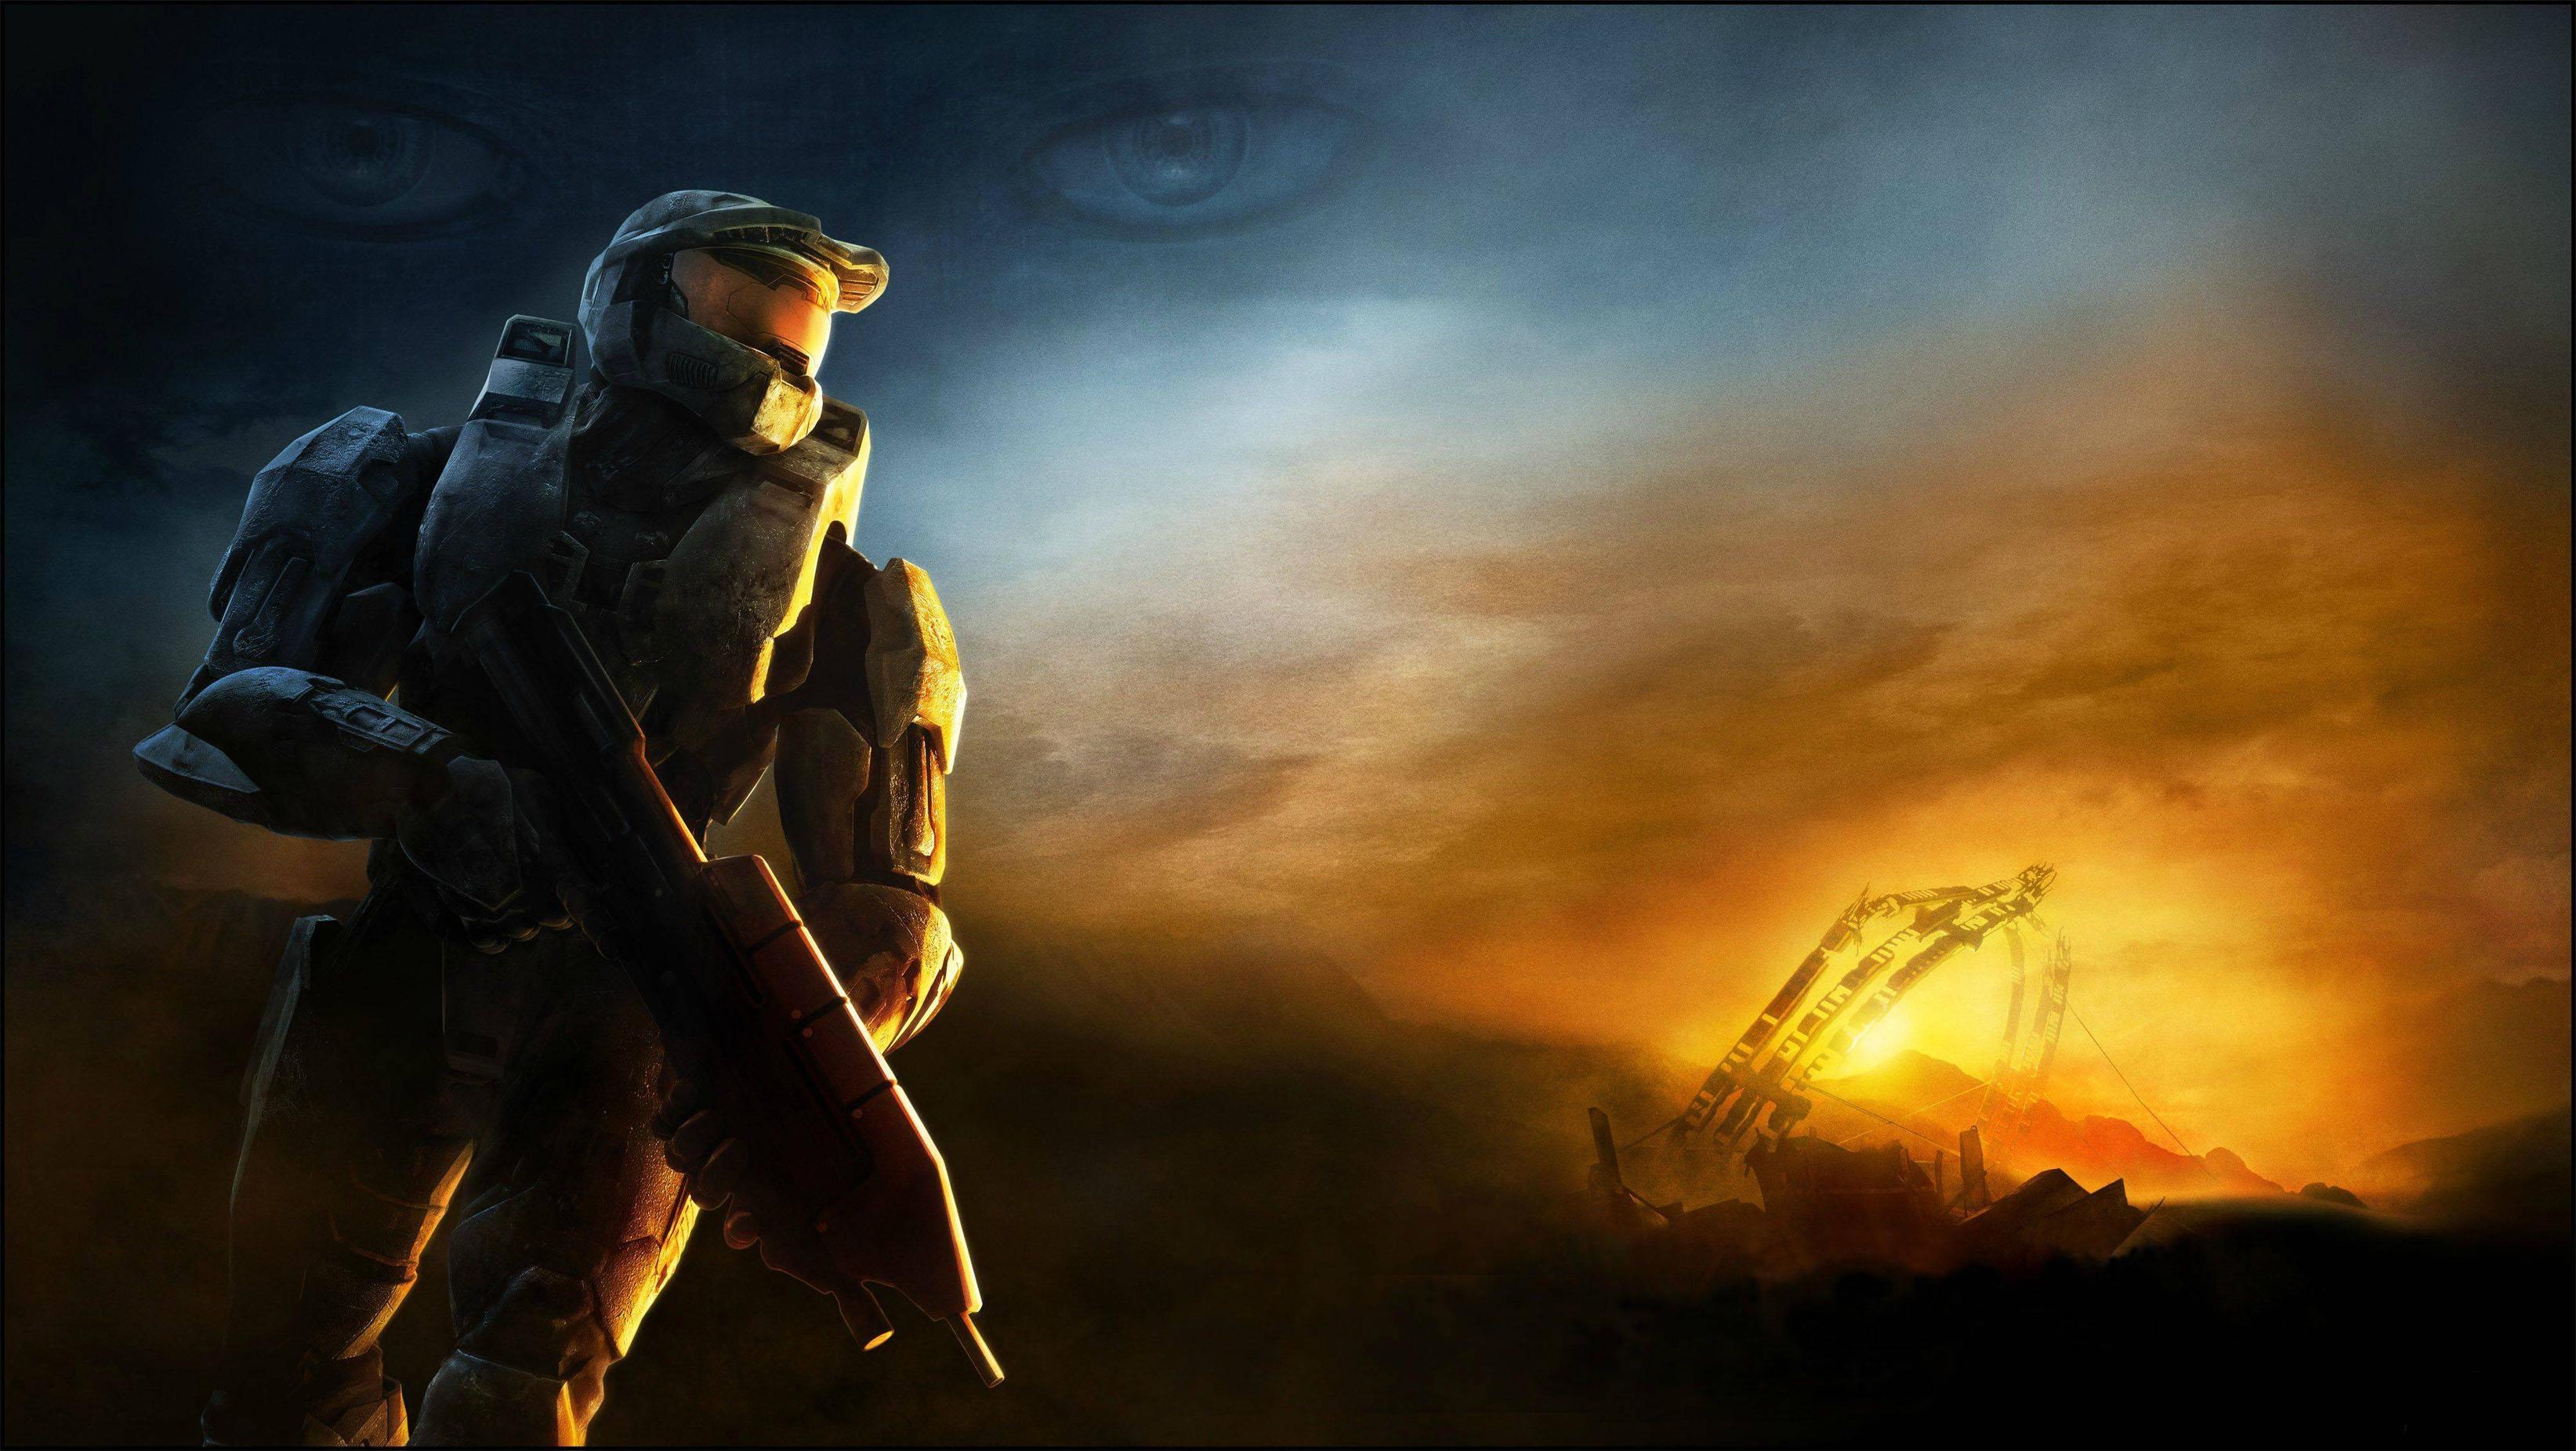 Halo 3 PC system requirements